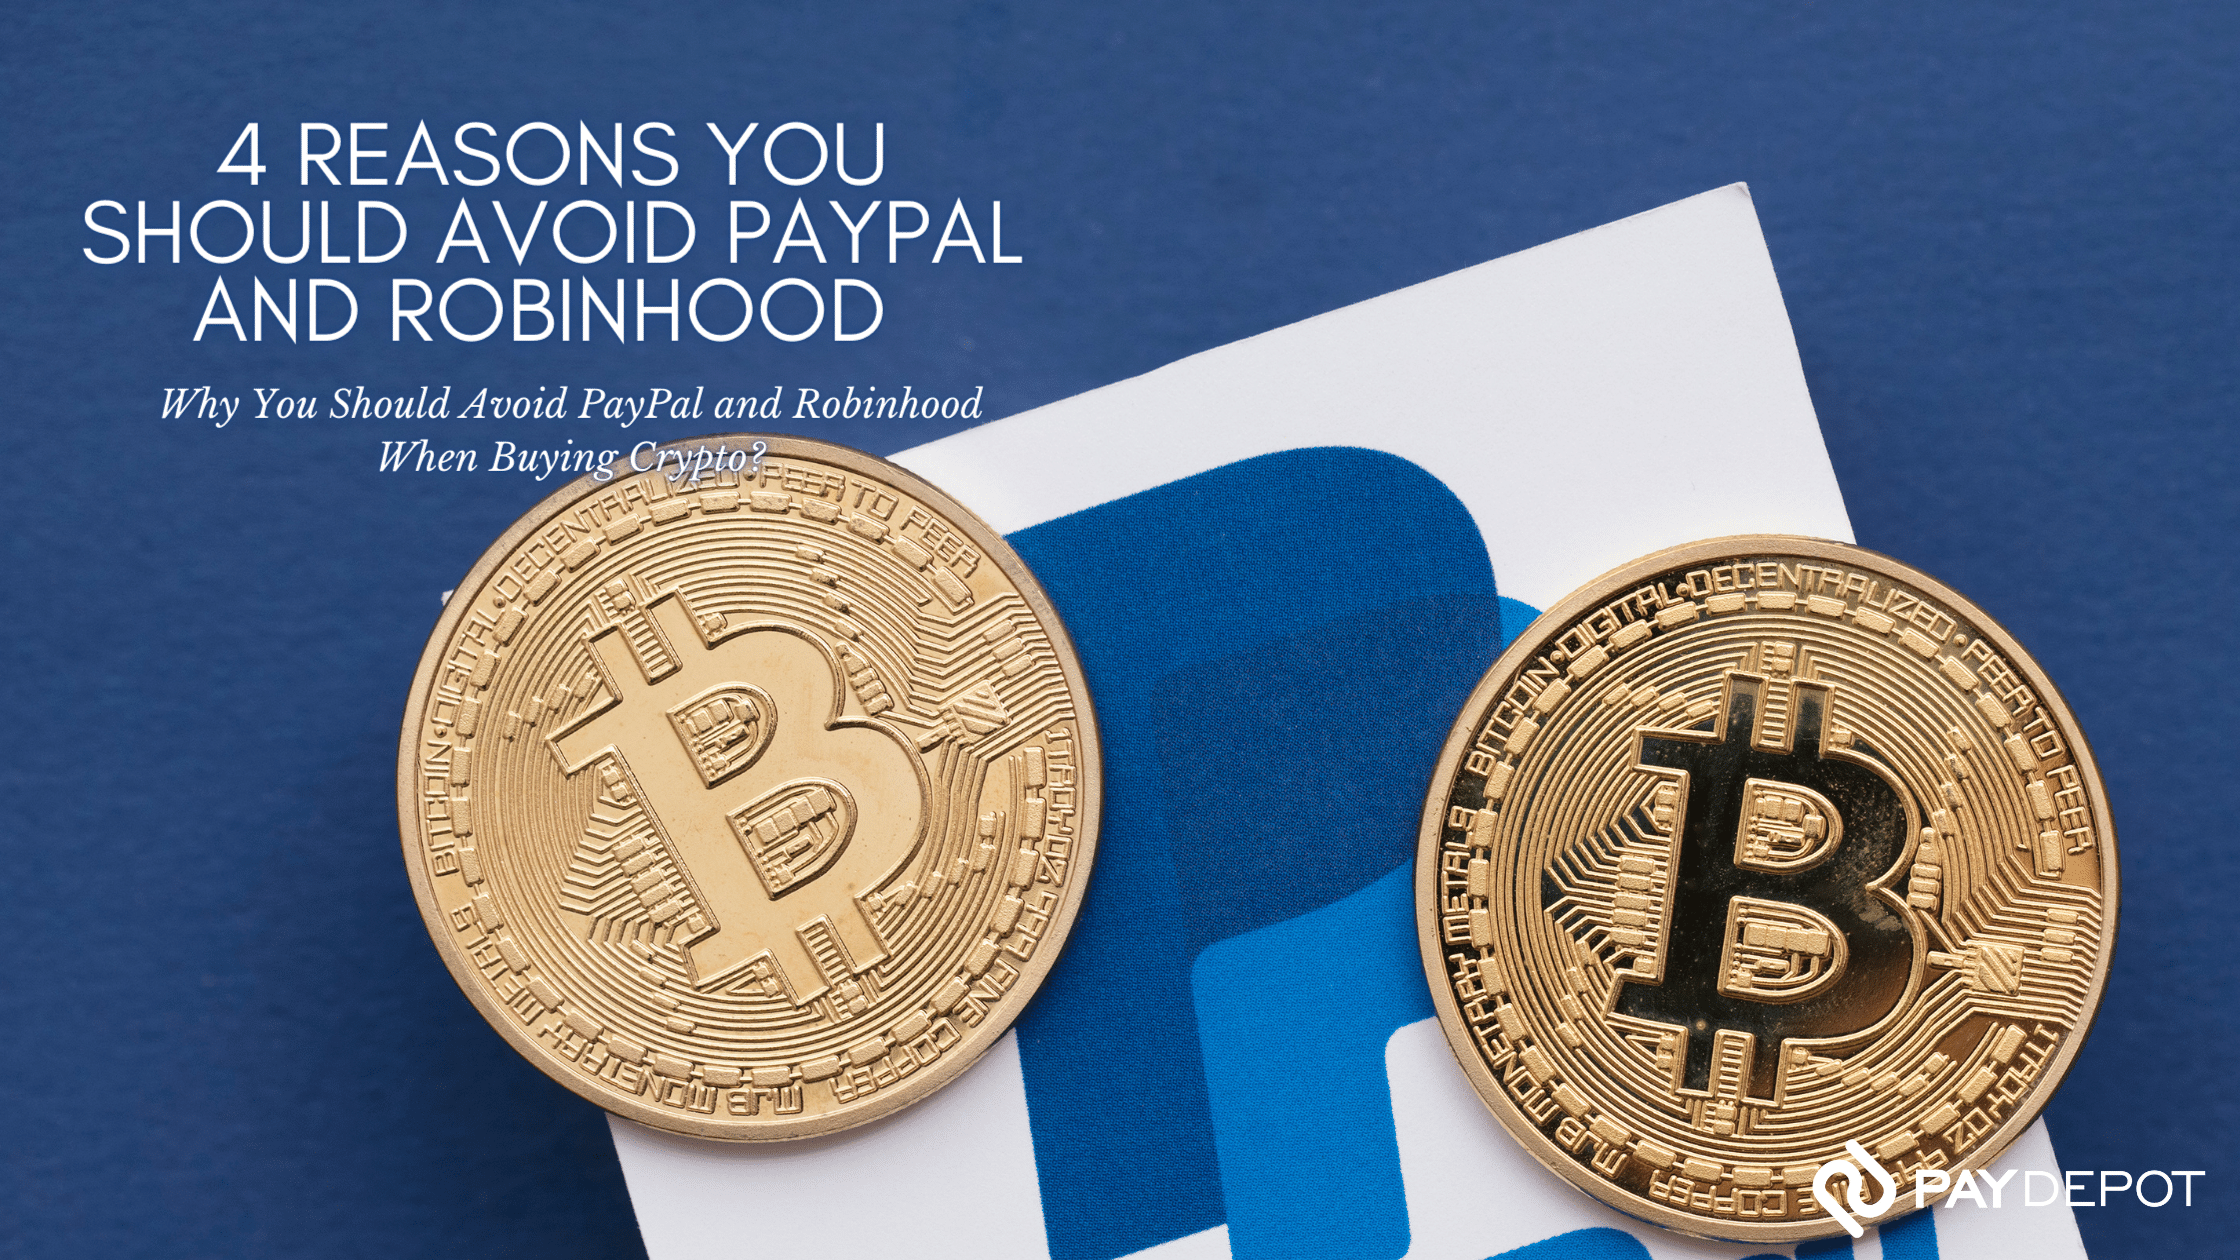 4 Reasons You Should Avoid PayPal and Robinhood When Buying Crypto